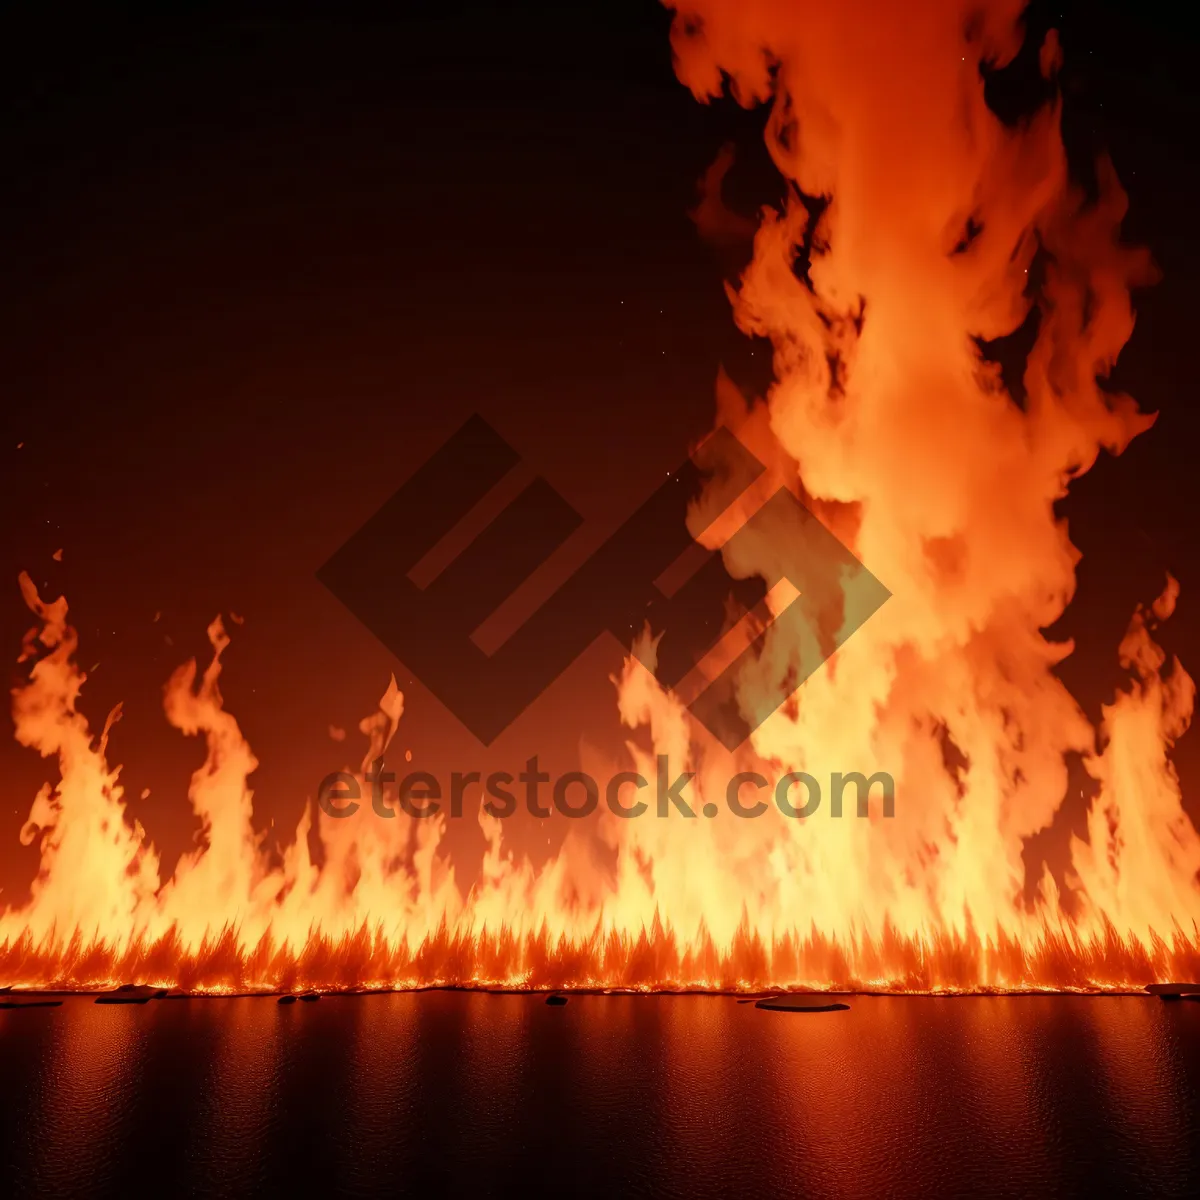 Picture of Blazing Inferno: Fiery Heat and Burning Flames